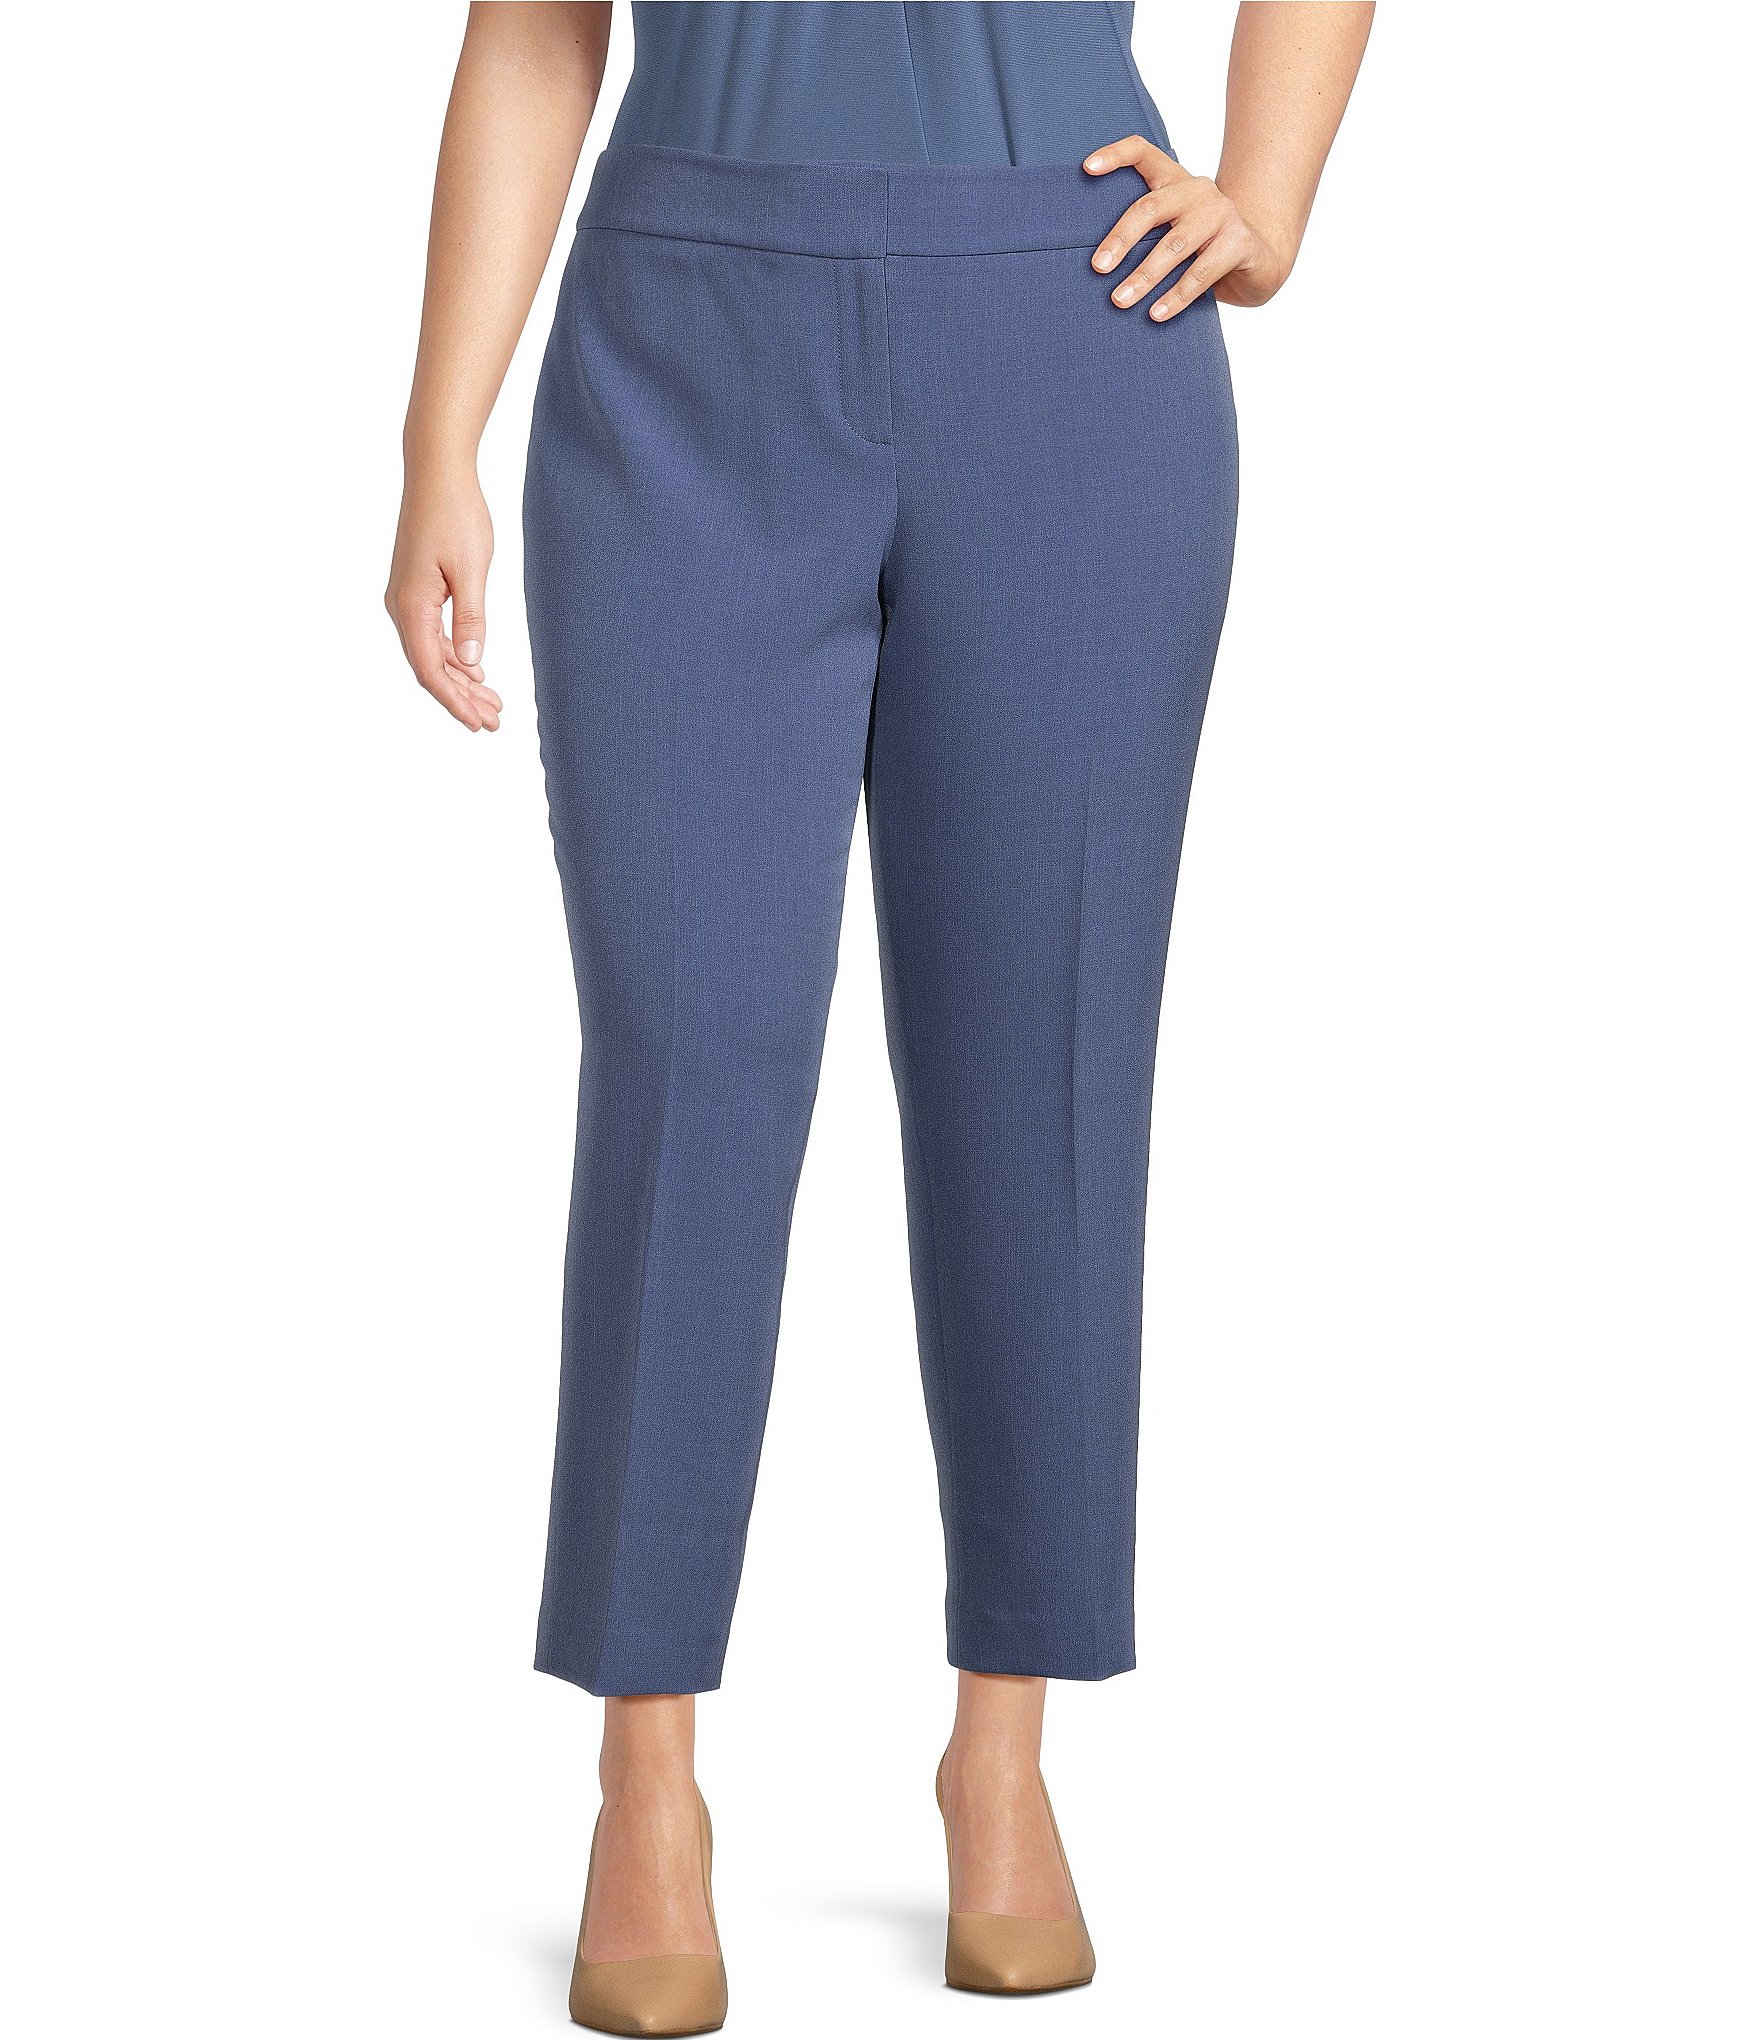 Kasper Plus Size Flat Front High Waisted Extended Tab Coordinating